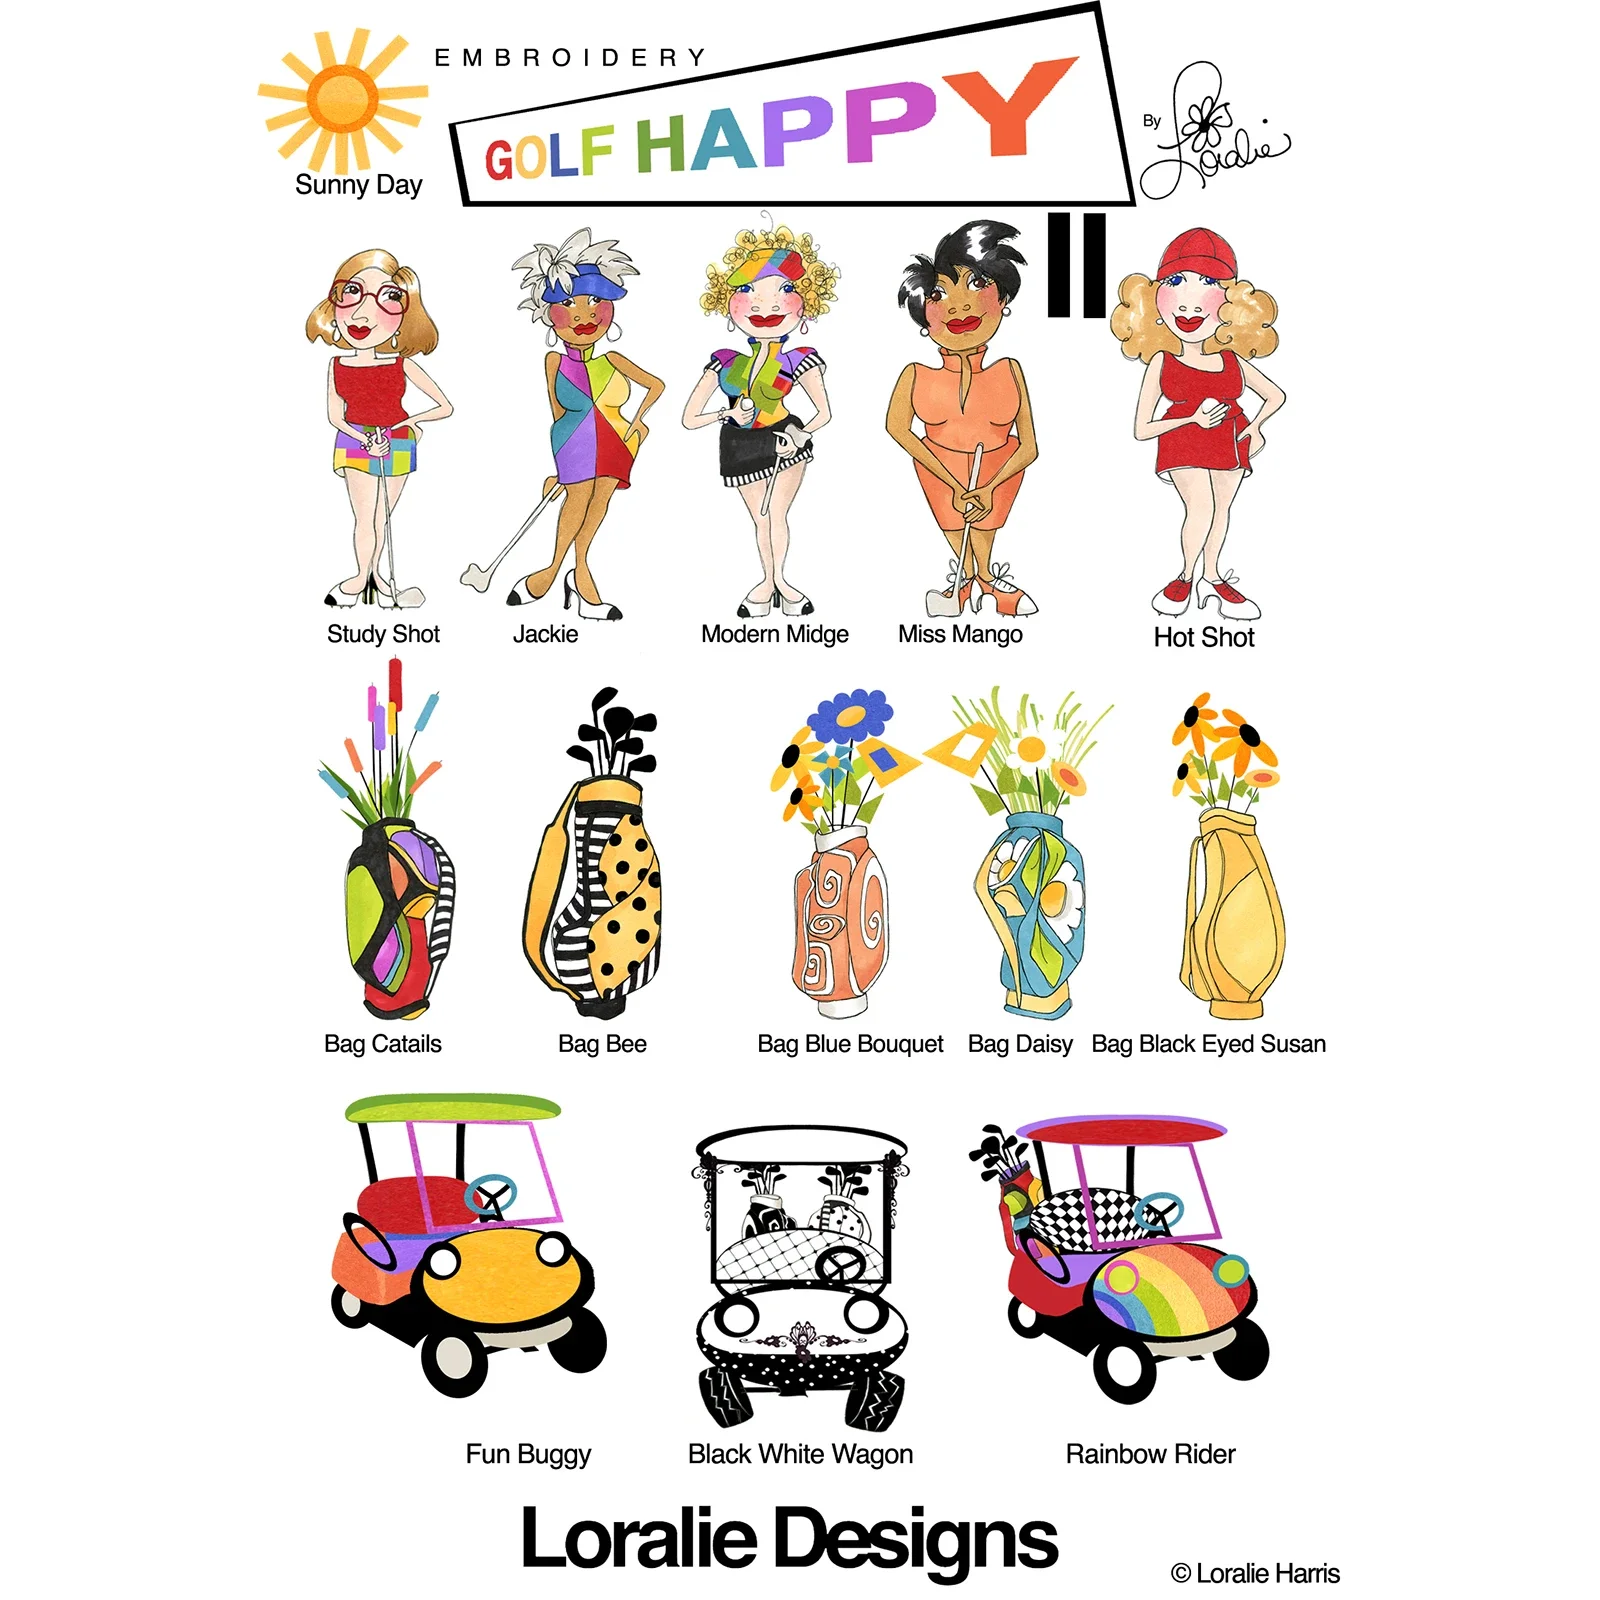 Loralie Designs Golf Happy 2 Embroidery Machine Designs Now Available Milled,Attractive Wedding Simple Blouse Embroidery Designs